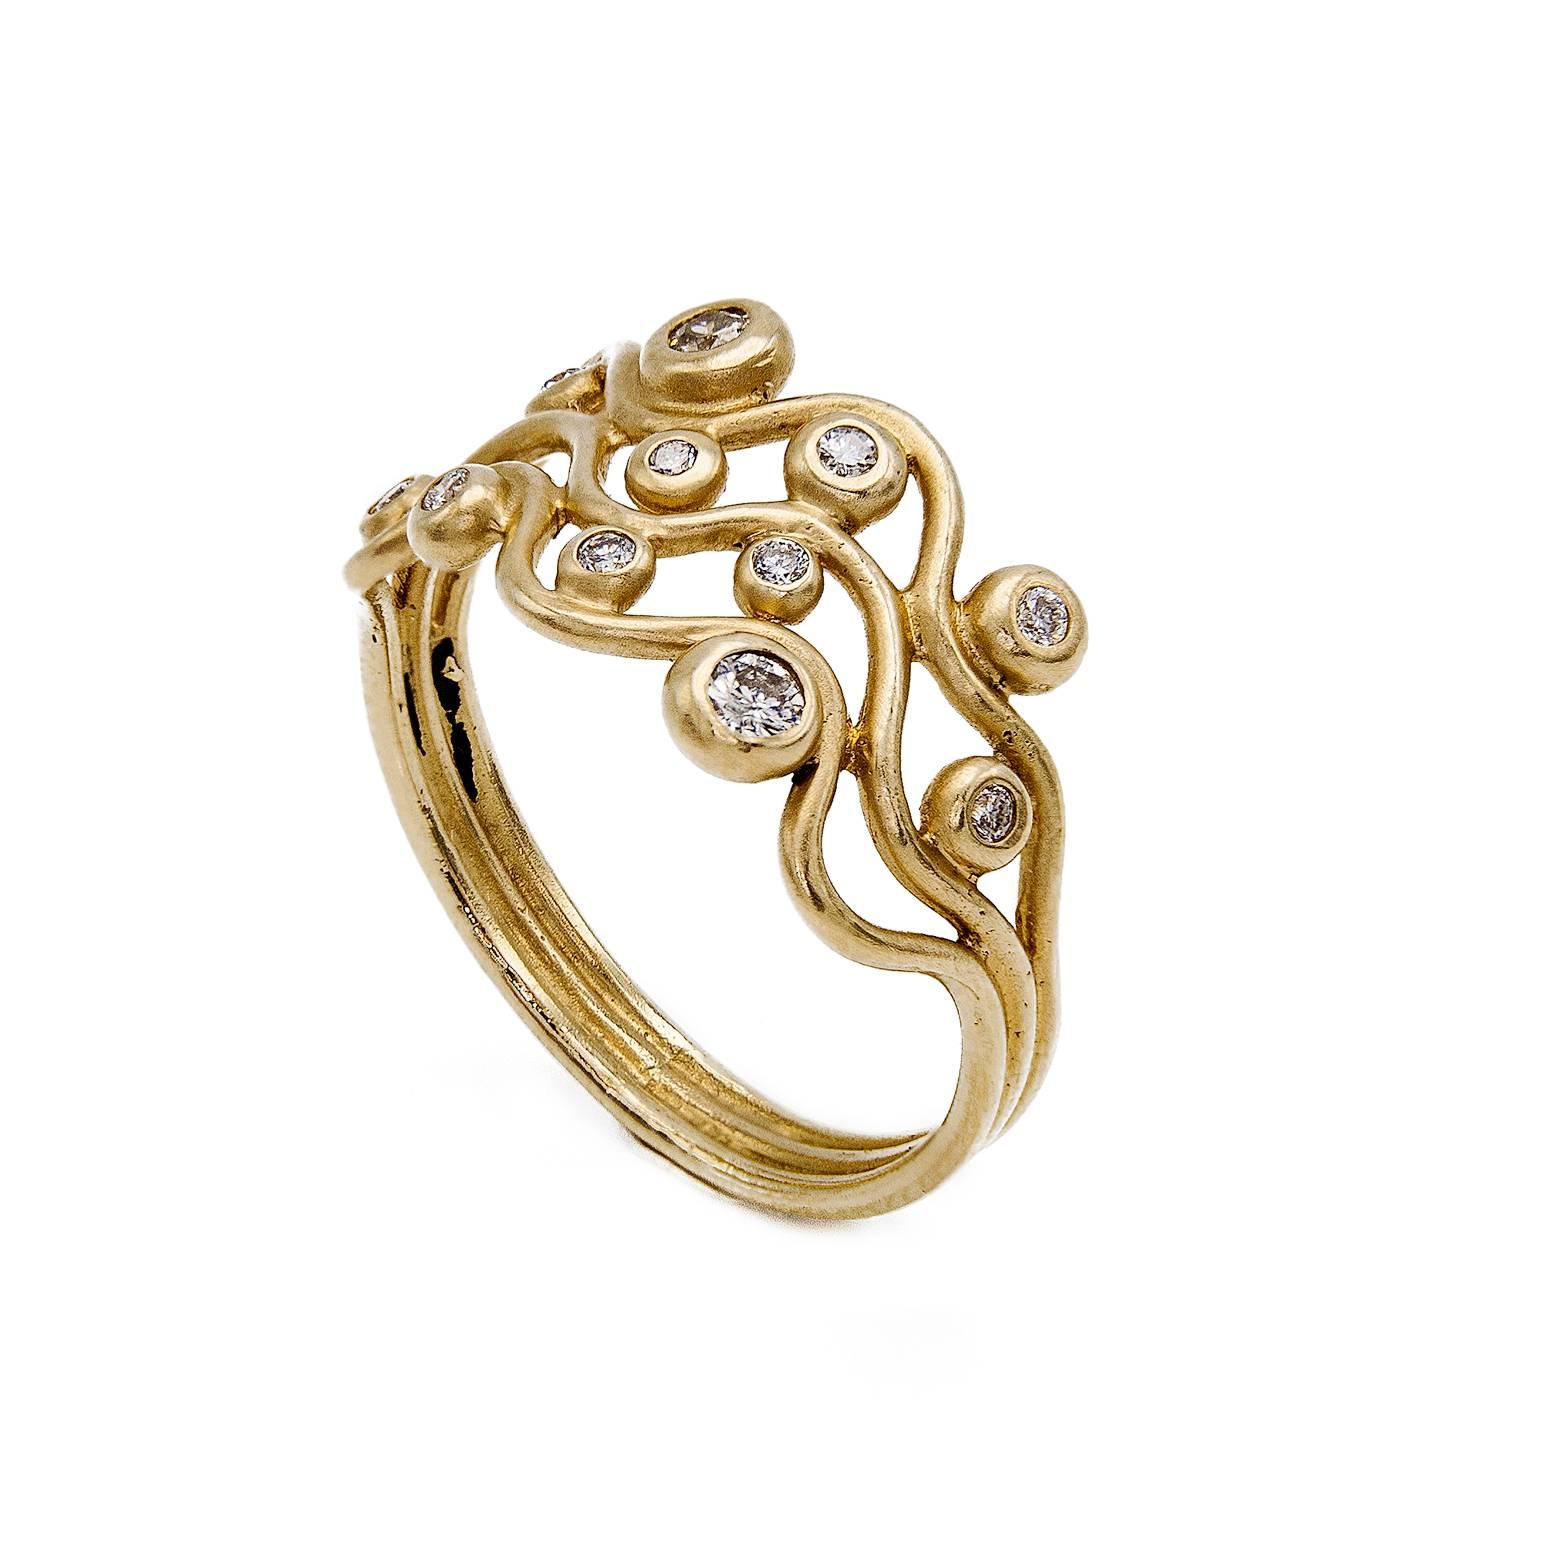 Swimming in the California sun on Golden waves! Made in our San Francisco Bay Area Studio this 14K yellow gold ring is adorned with 11 diamonds and dances as the swirls entertain your wild imagination. One of a kind and a size 7.  The size can be